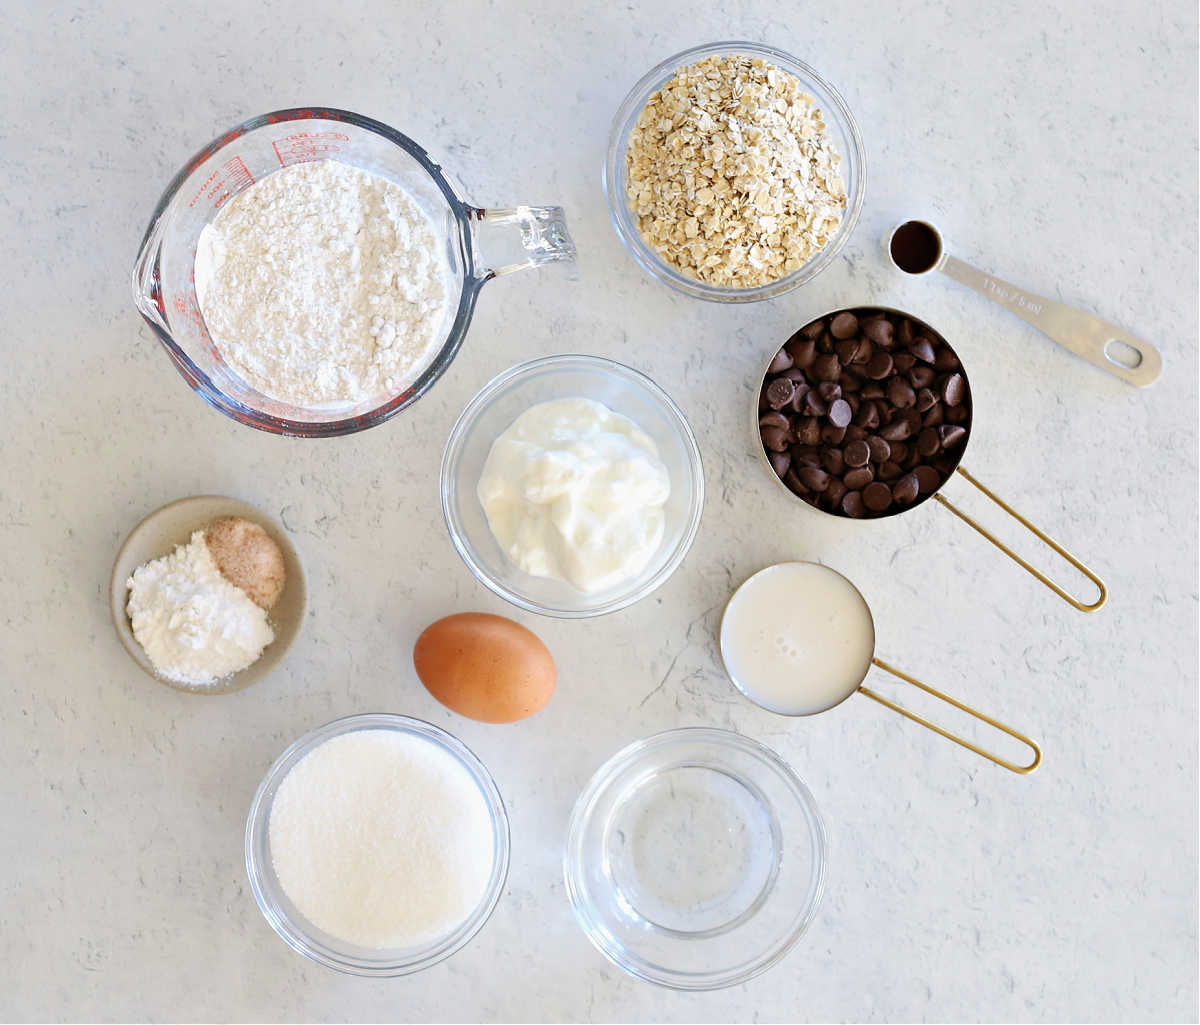 Ingredients for healthy muffins made with oats and chocolate chips